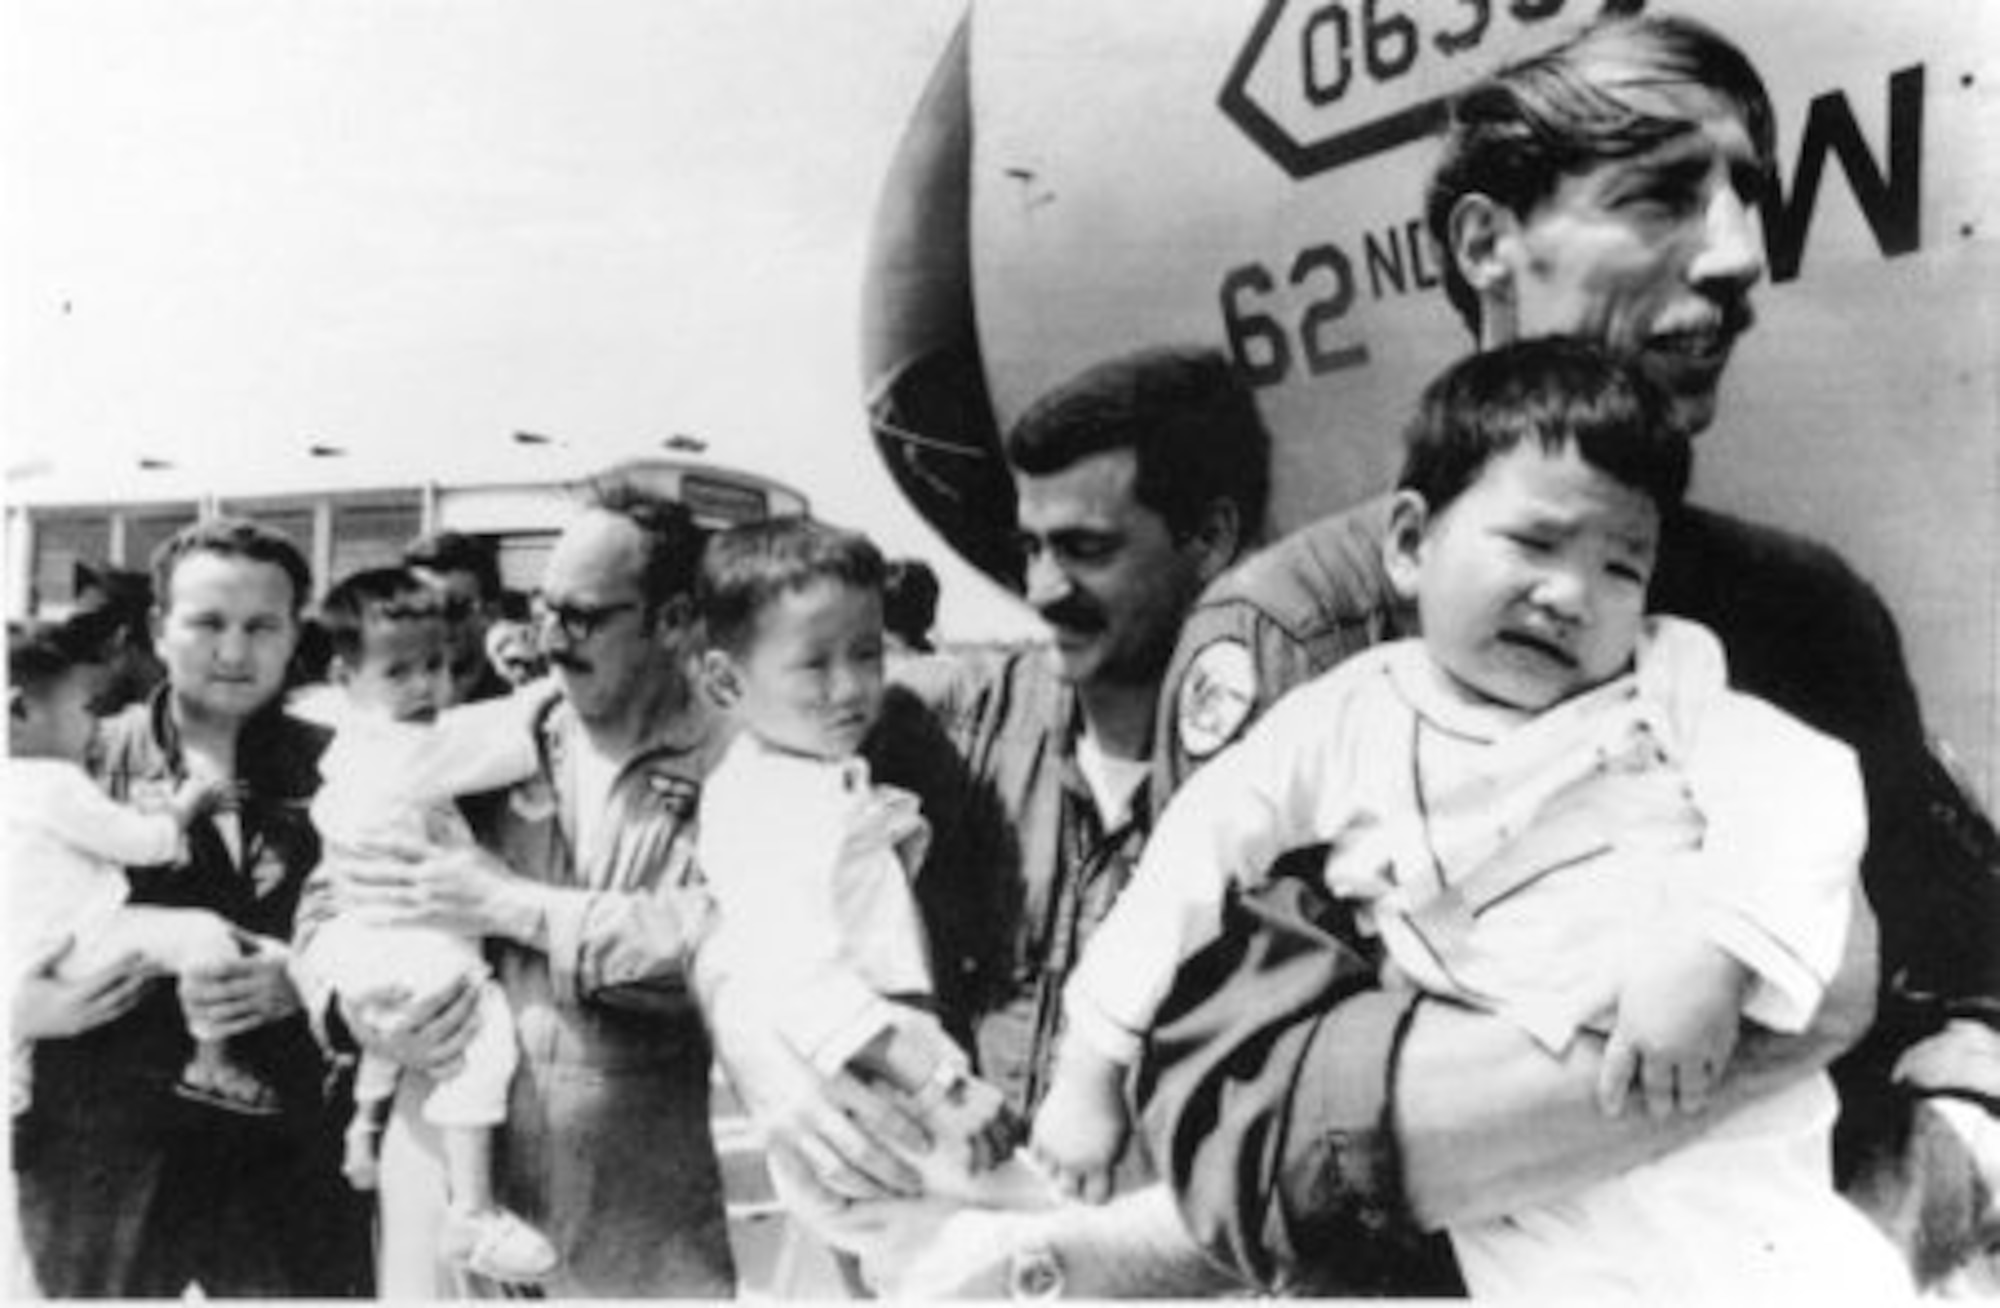 62nd Military Airlift Wing service members carry orphaned children during Operation Babylift, April, 1975.